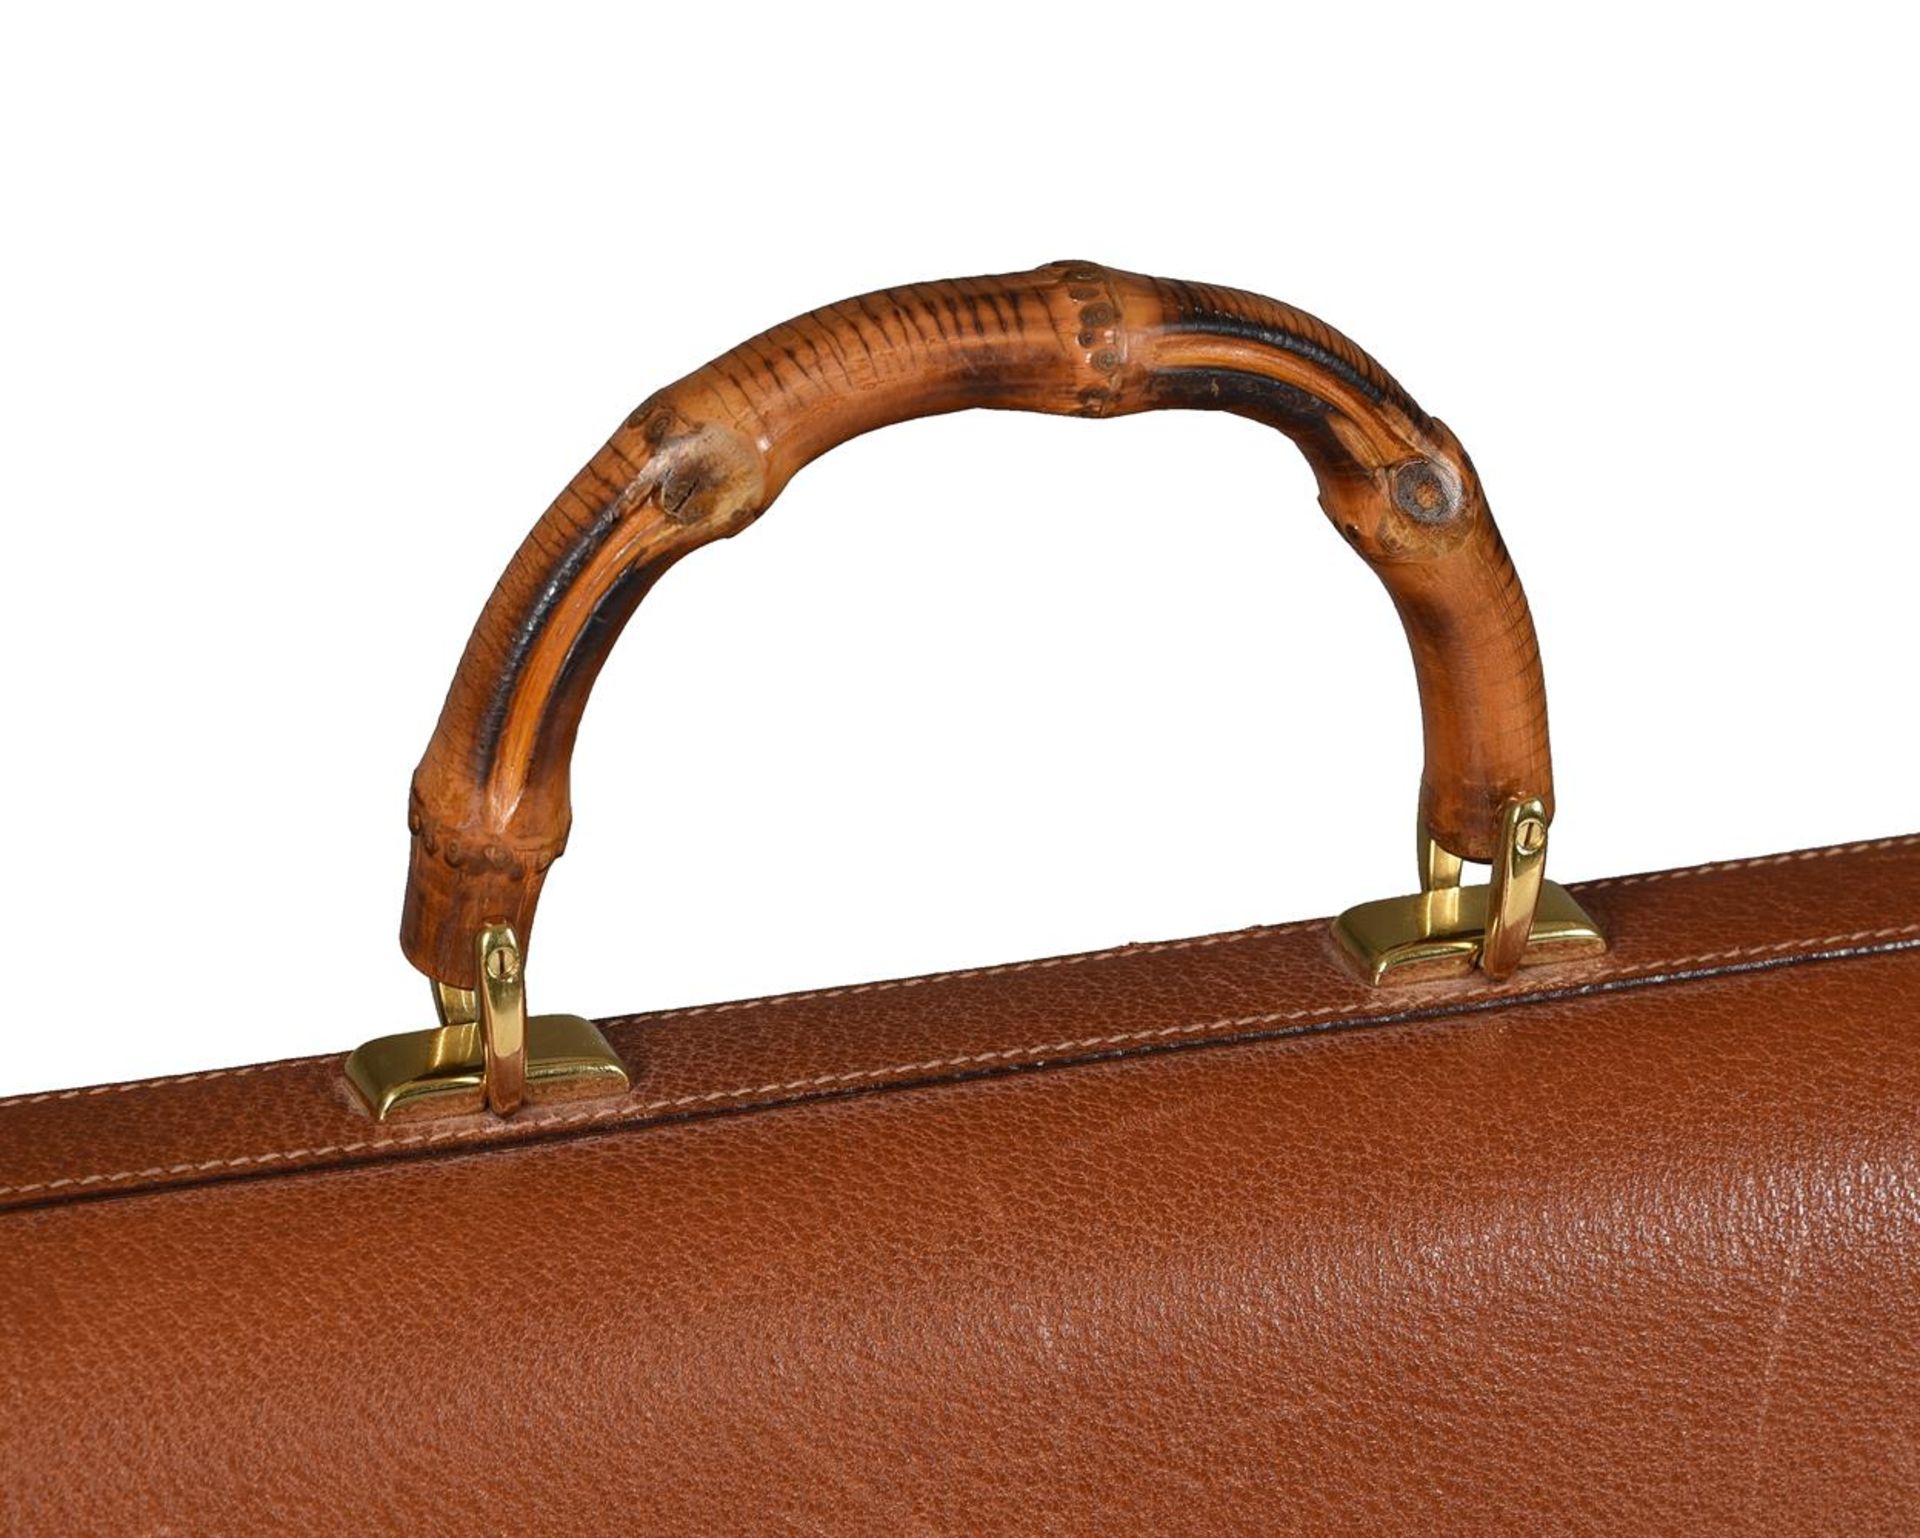 GUCCI, A VINTAGE TAN LEATHER AND BAMBOO BRIEFCASE - Image 4 of 5